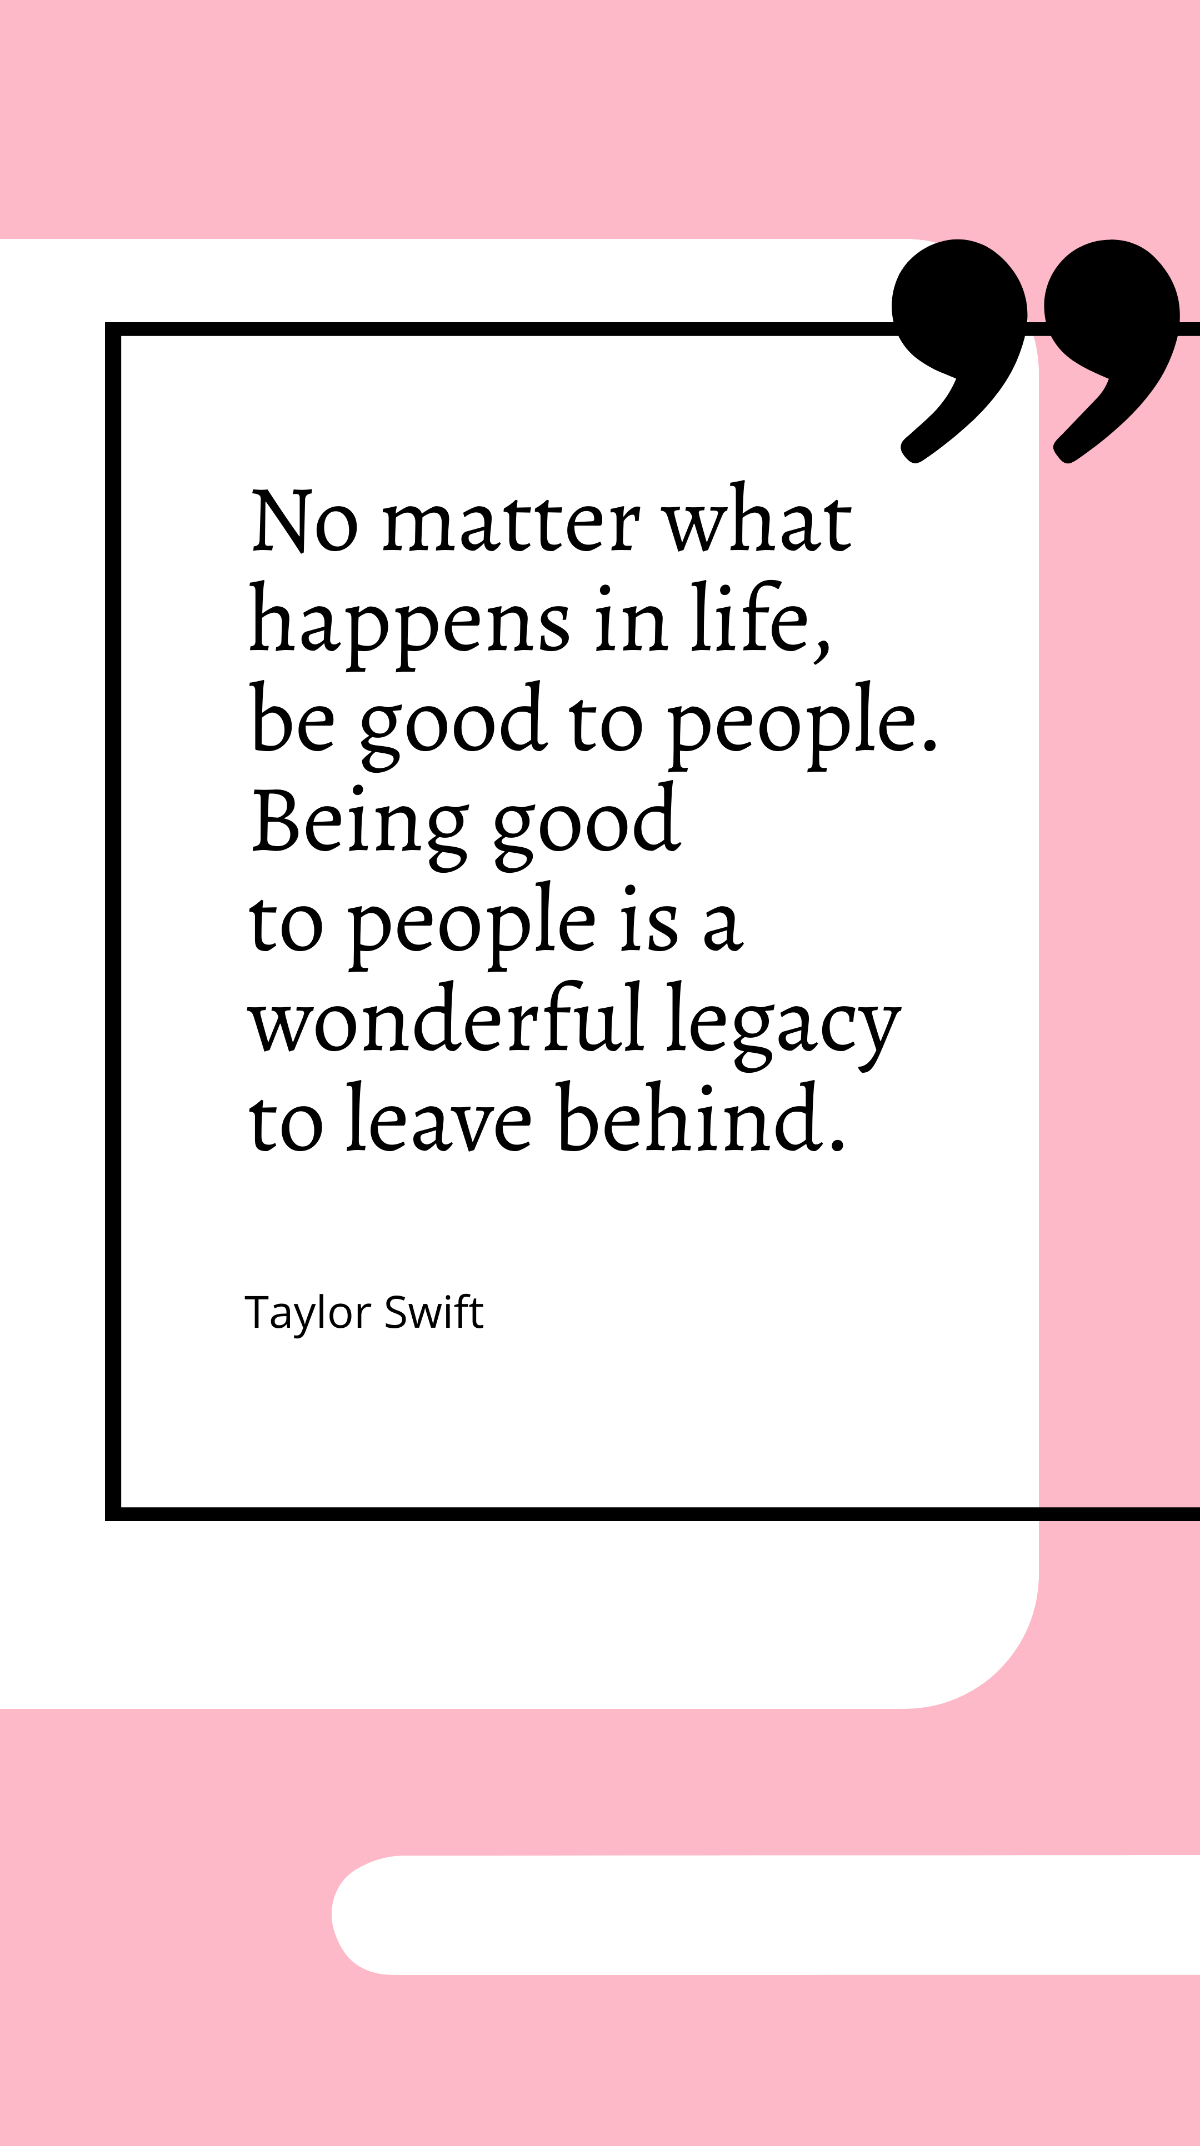 Taylor Swift - No matter what happens in life, be good to people. Being good to people is a wonderful legacy to leave behind. Template